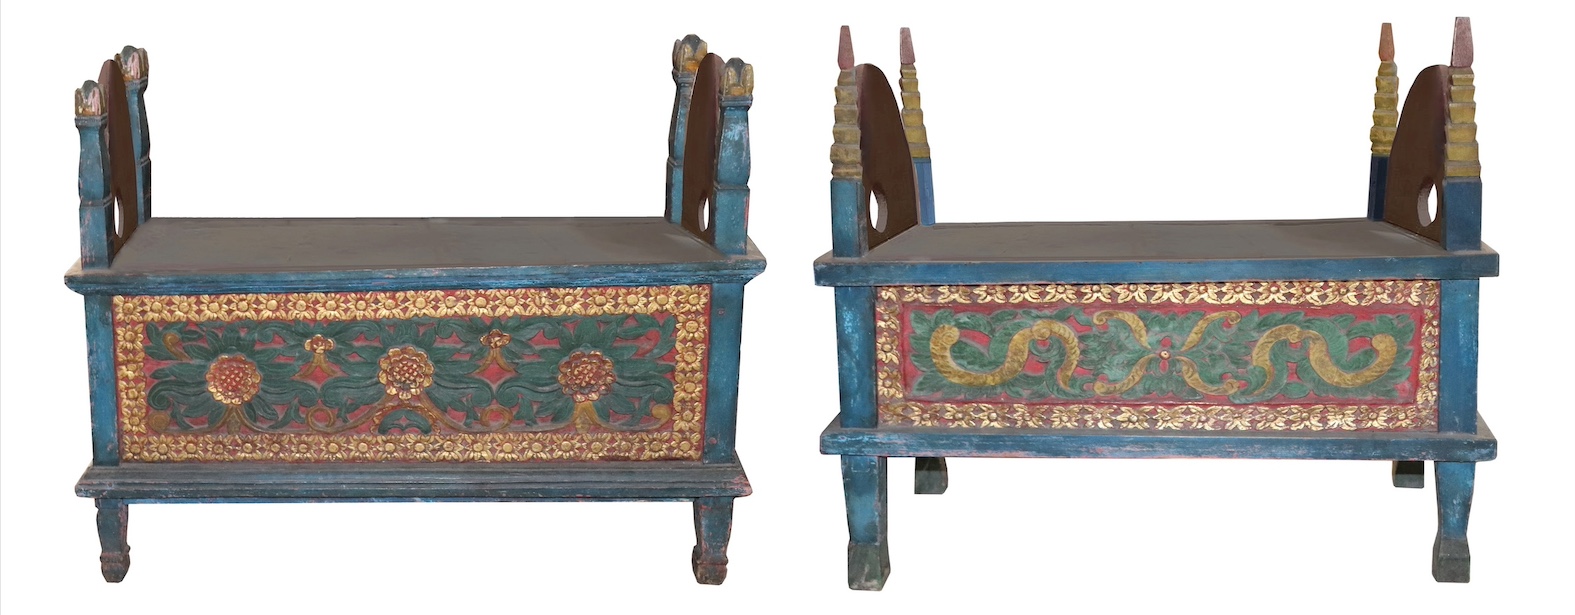 Two pieces polychrome carved wooden jodang